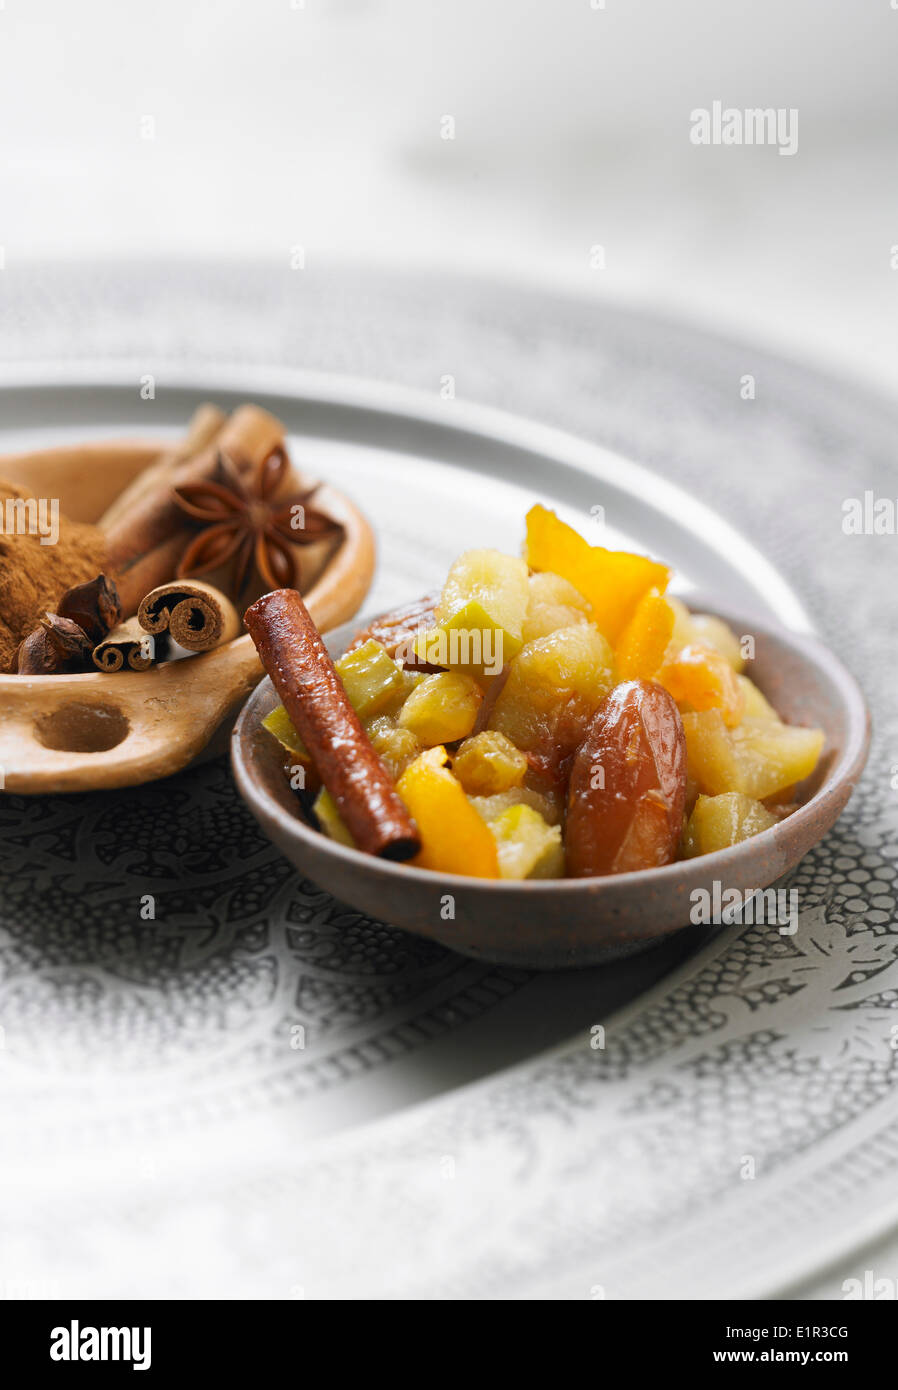 Spicy stewed dates and apples Stock Photo